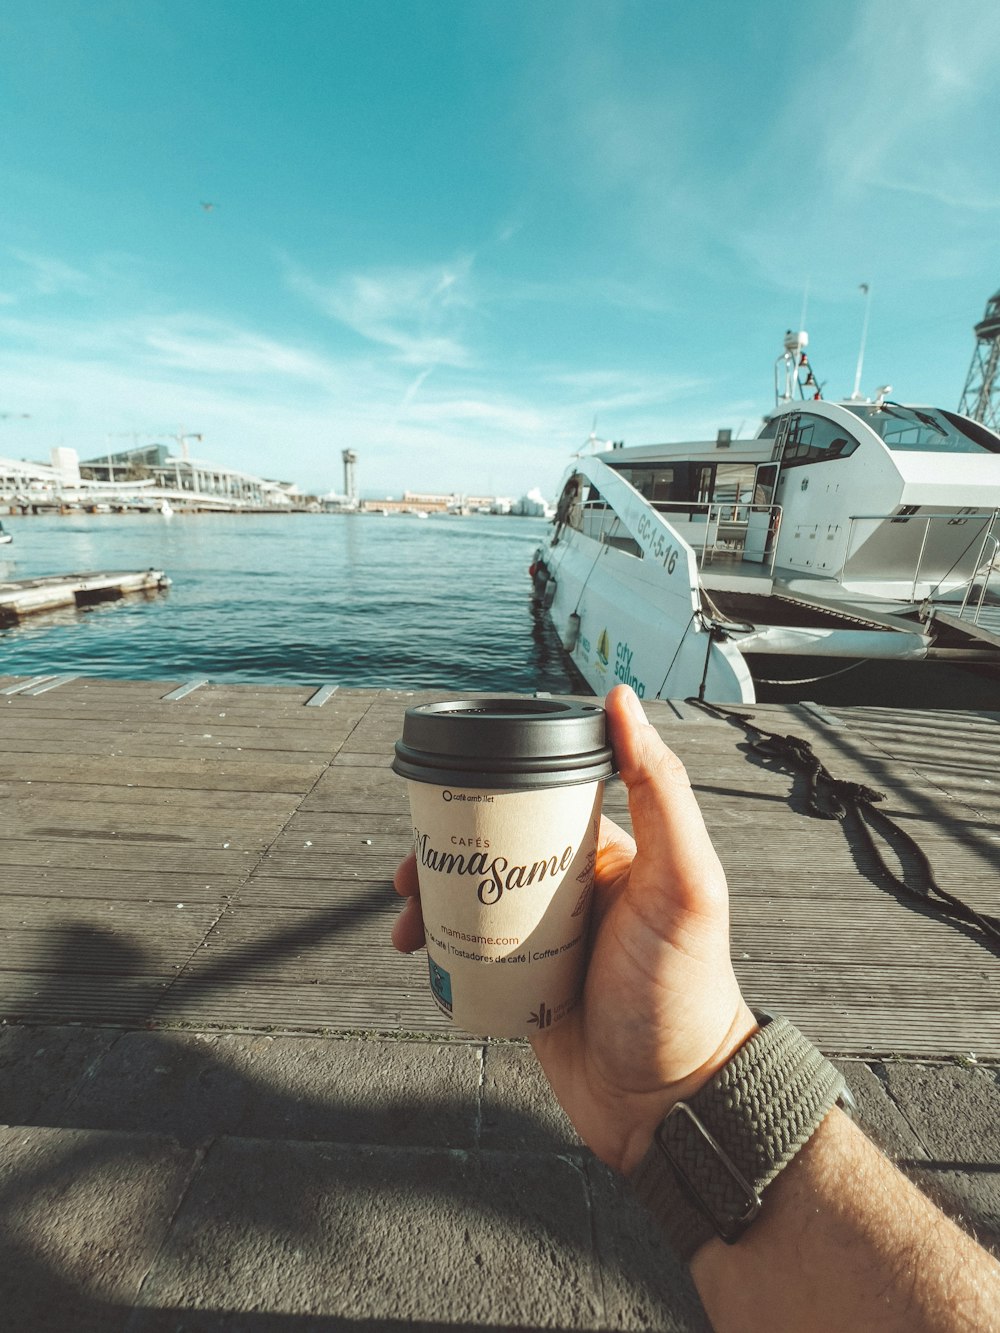 a person holding a cup of coffee on a dock